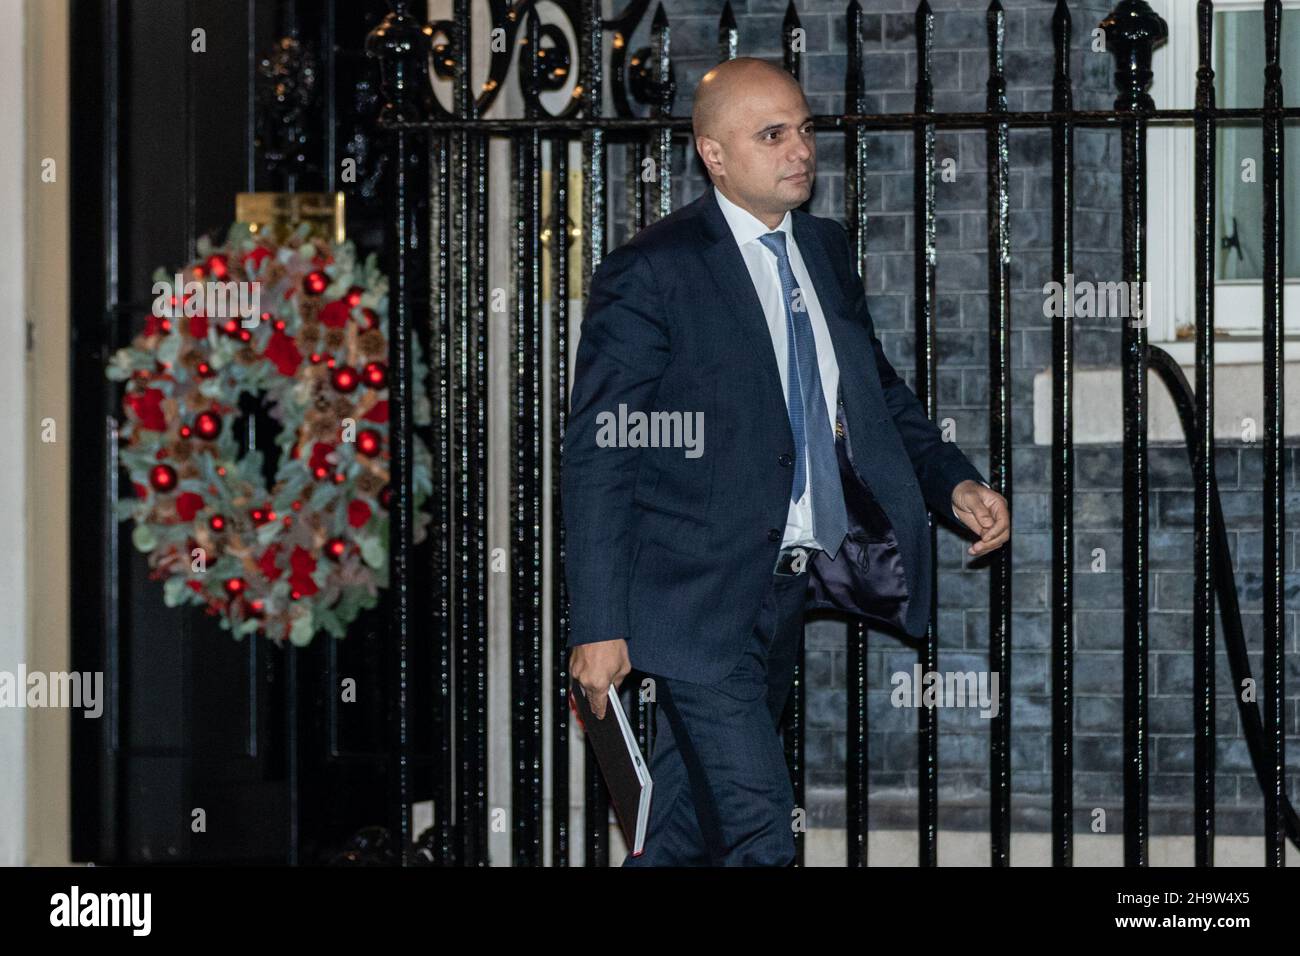 London, UK. 8th Dec, 2021. Sajid Javid MP, Secretary of State for Health and Social Care. Cabinet ministers leave 10 Downing Street following meetings, prior to the PM's press conference this evening. Credit: Imageplotter/Alamy Live News Stock Photo